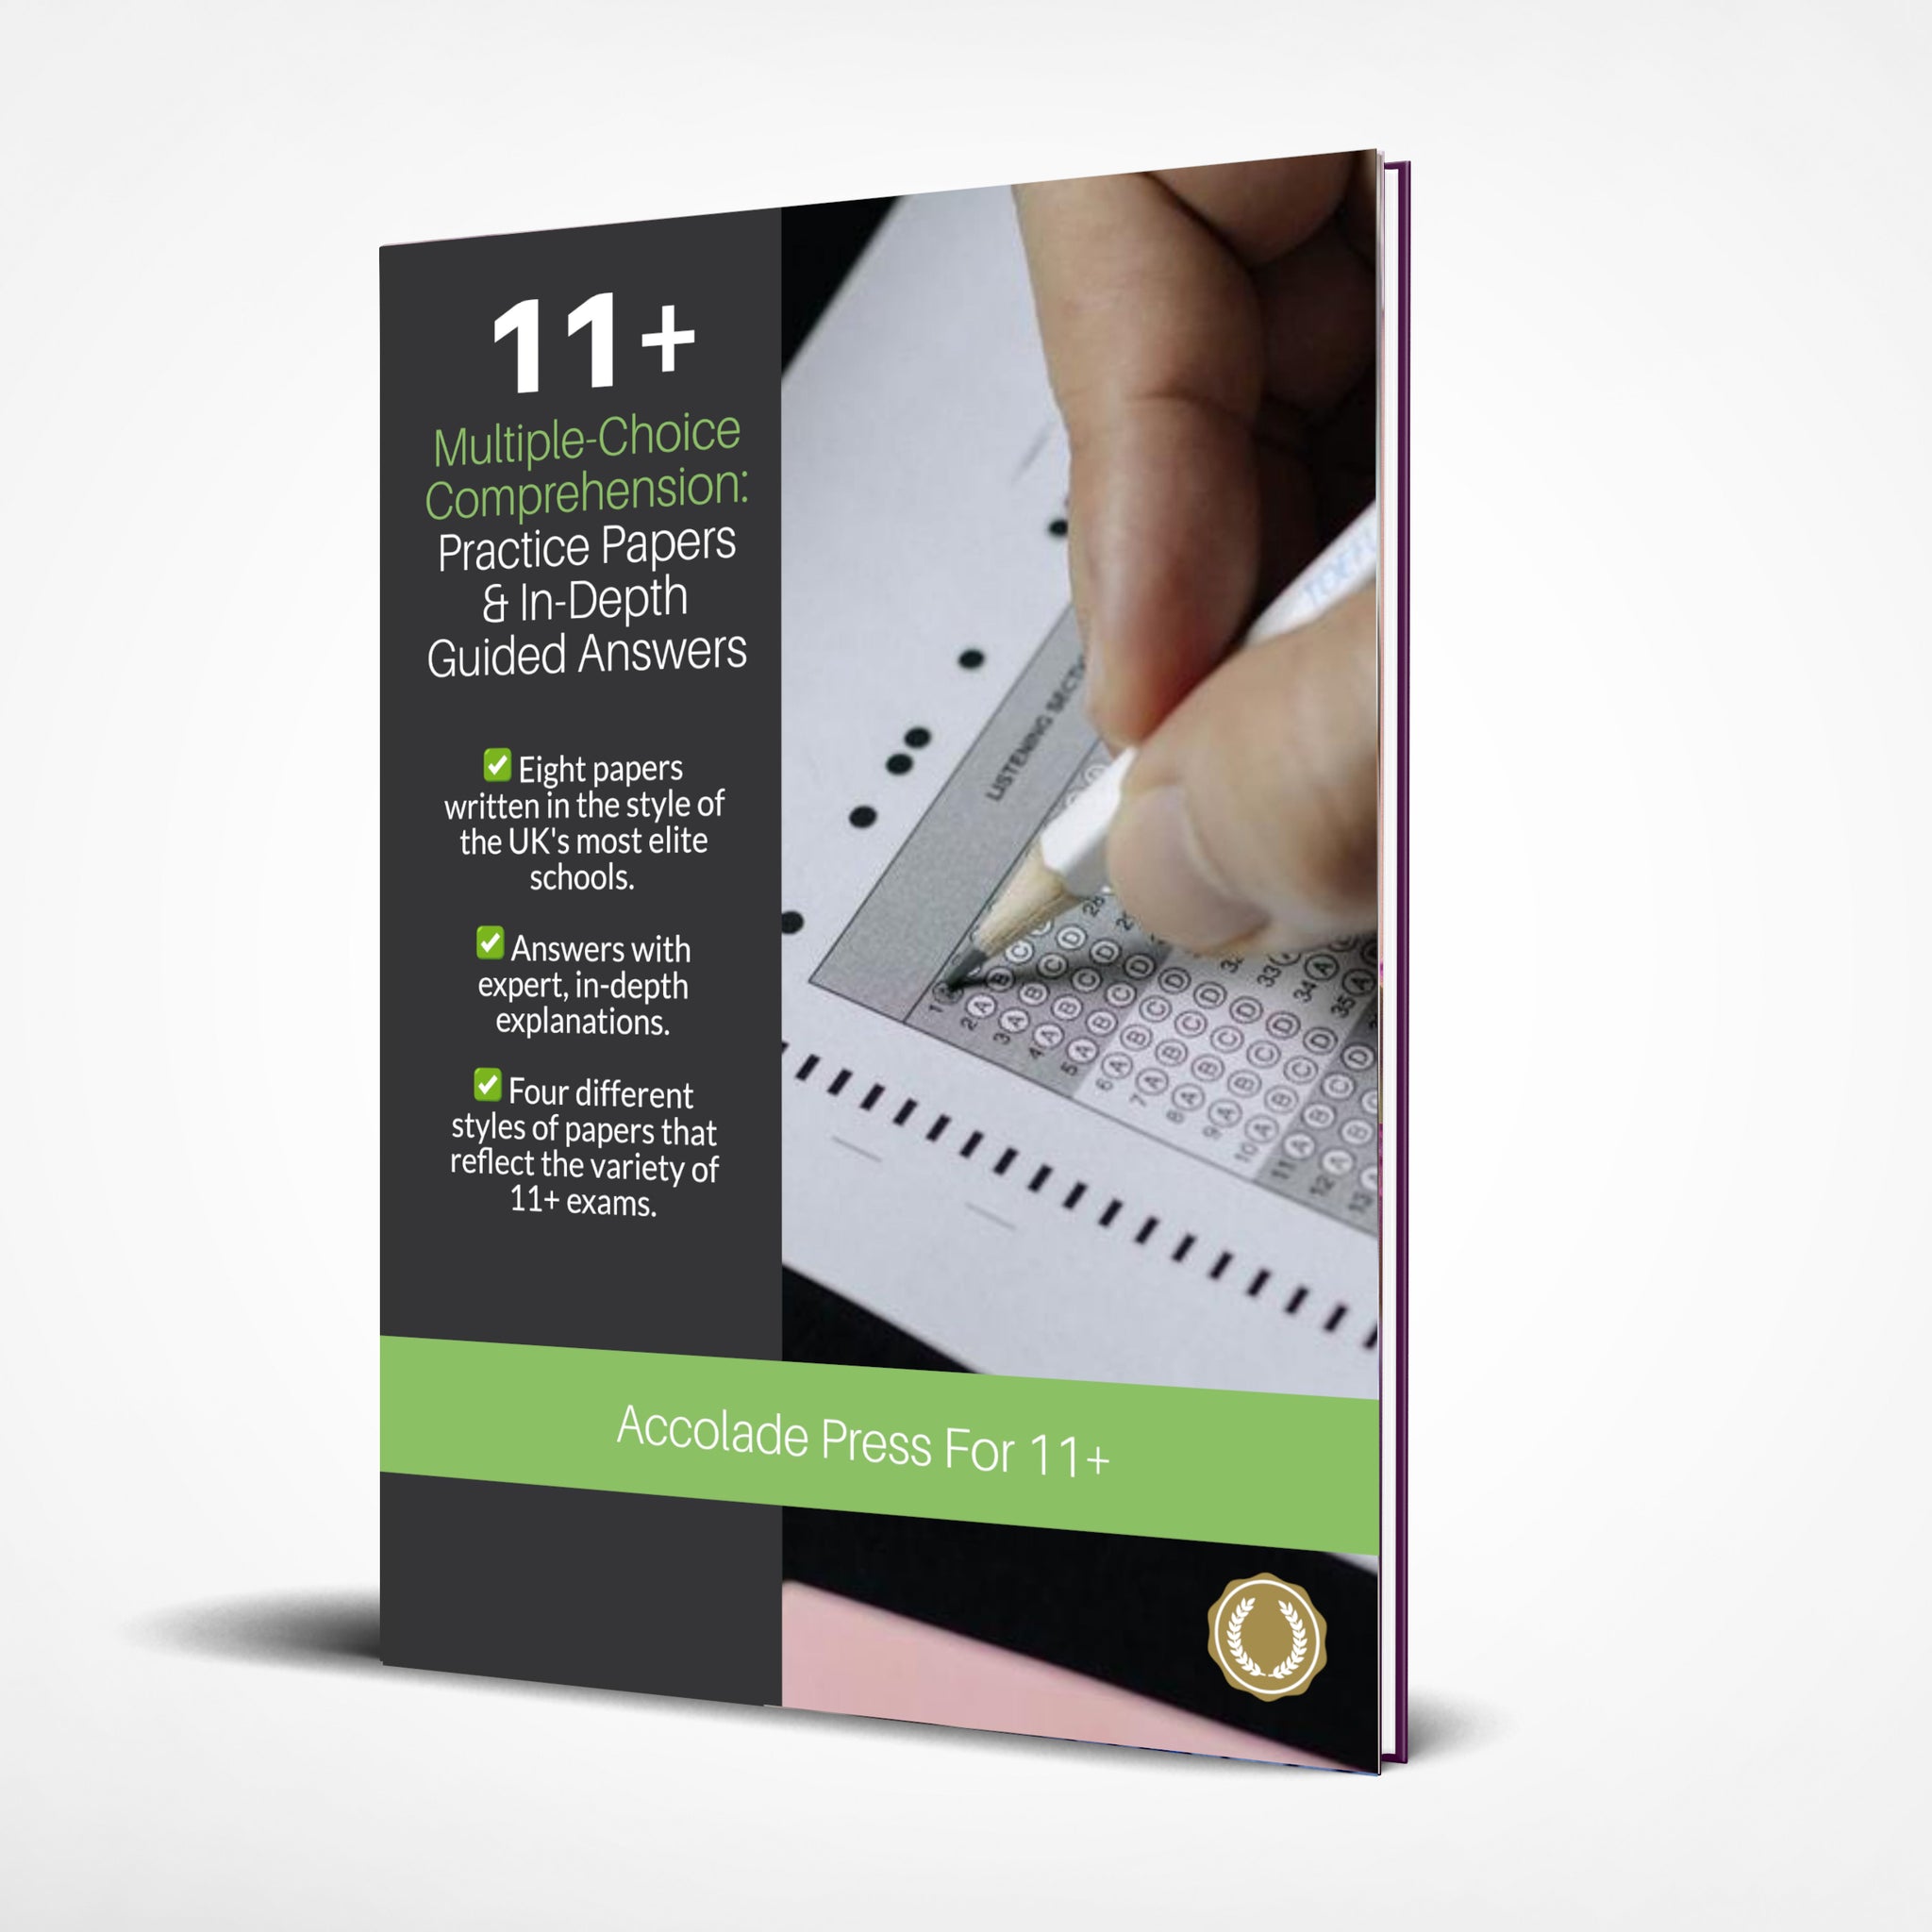 11+ Multiple-Choice Comprehension: Practice Papers & In-Depth Guided Answers